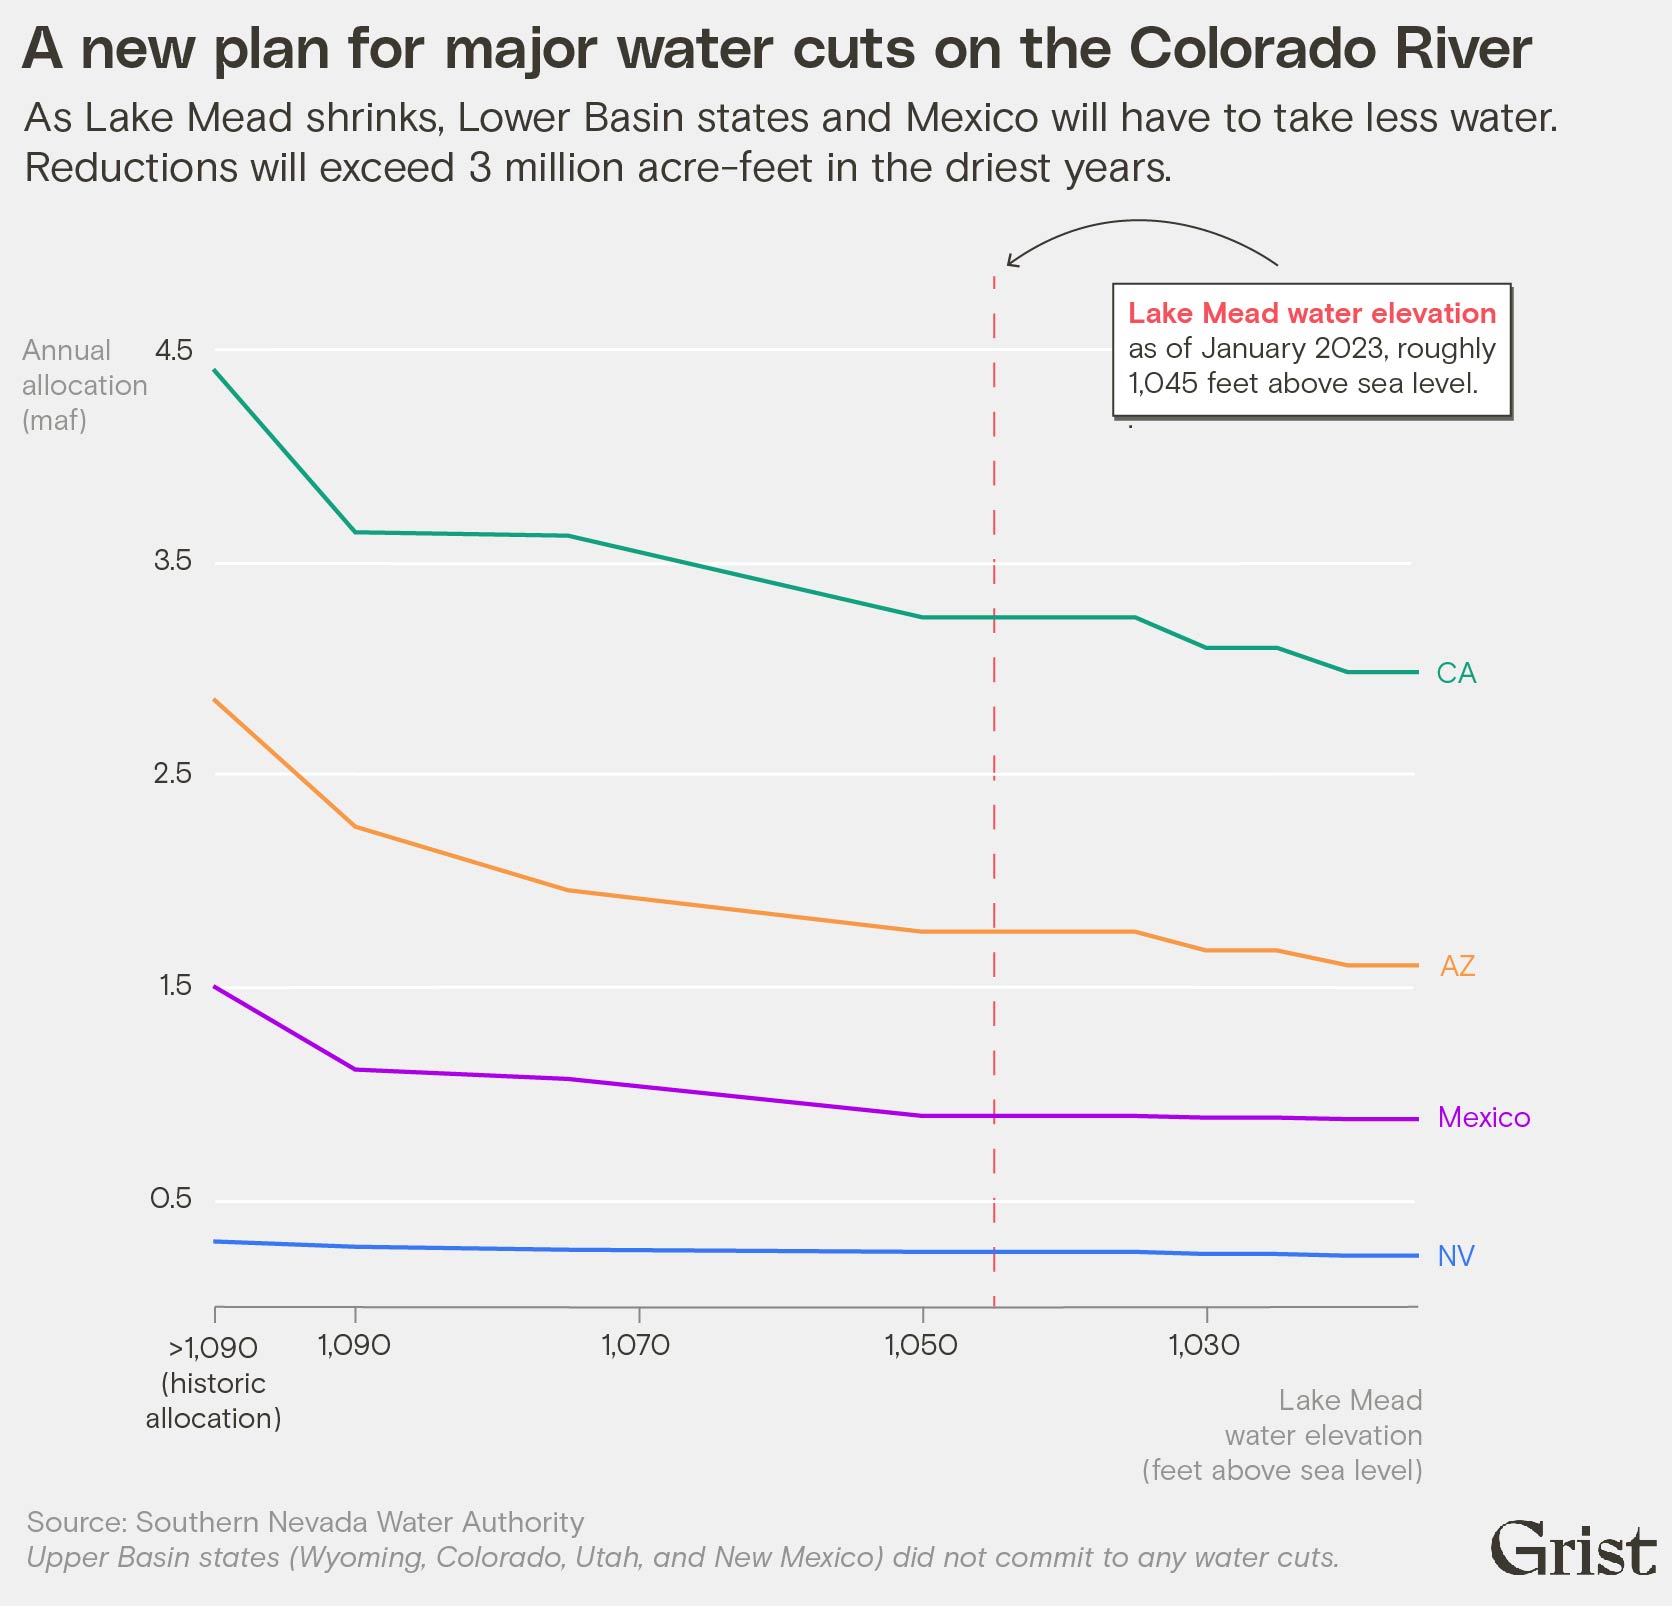 Multi-line chart shows proposed plan for water cuts among some states and Mexico in the Colorado River Basin.